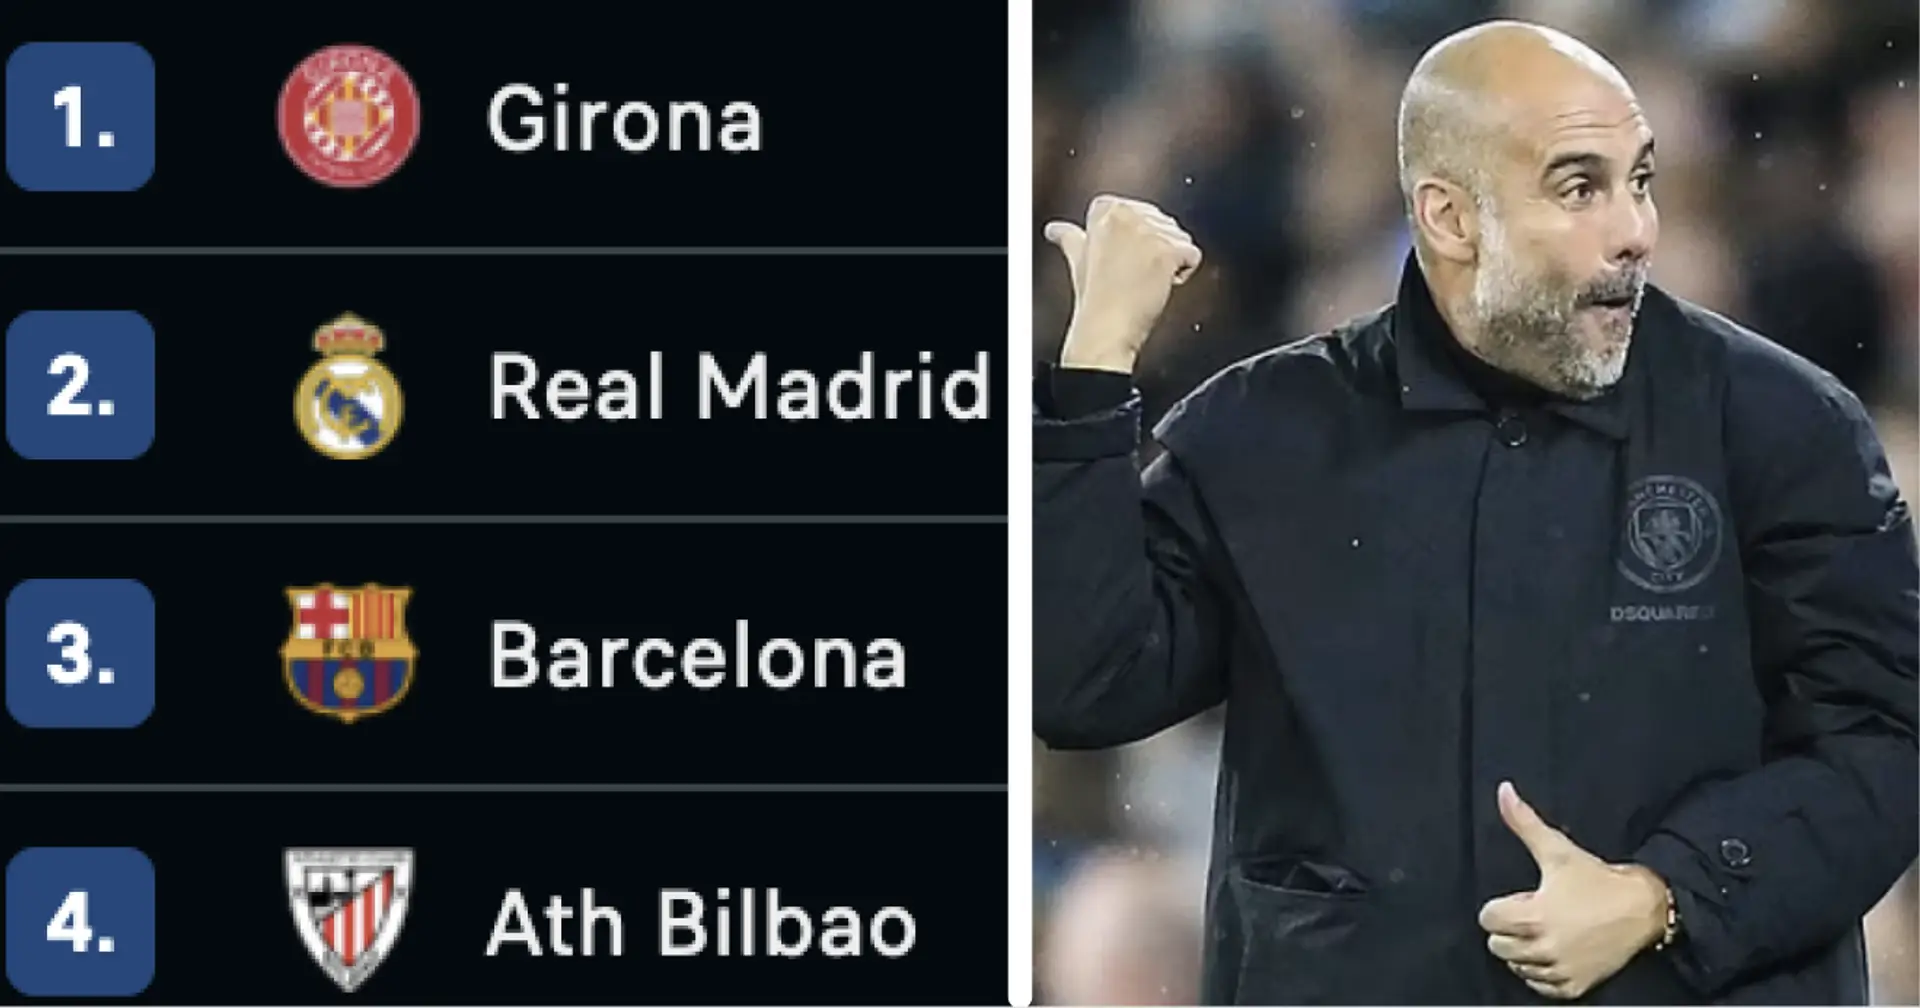 What Pep Guardiola has to do with La Liga leaders Girona who have more points than Man City – answered